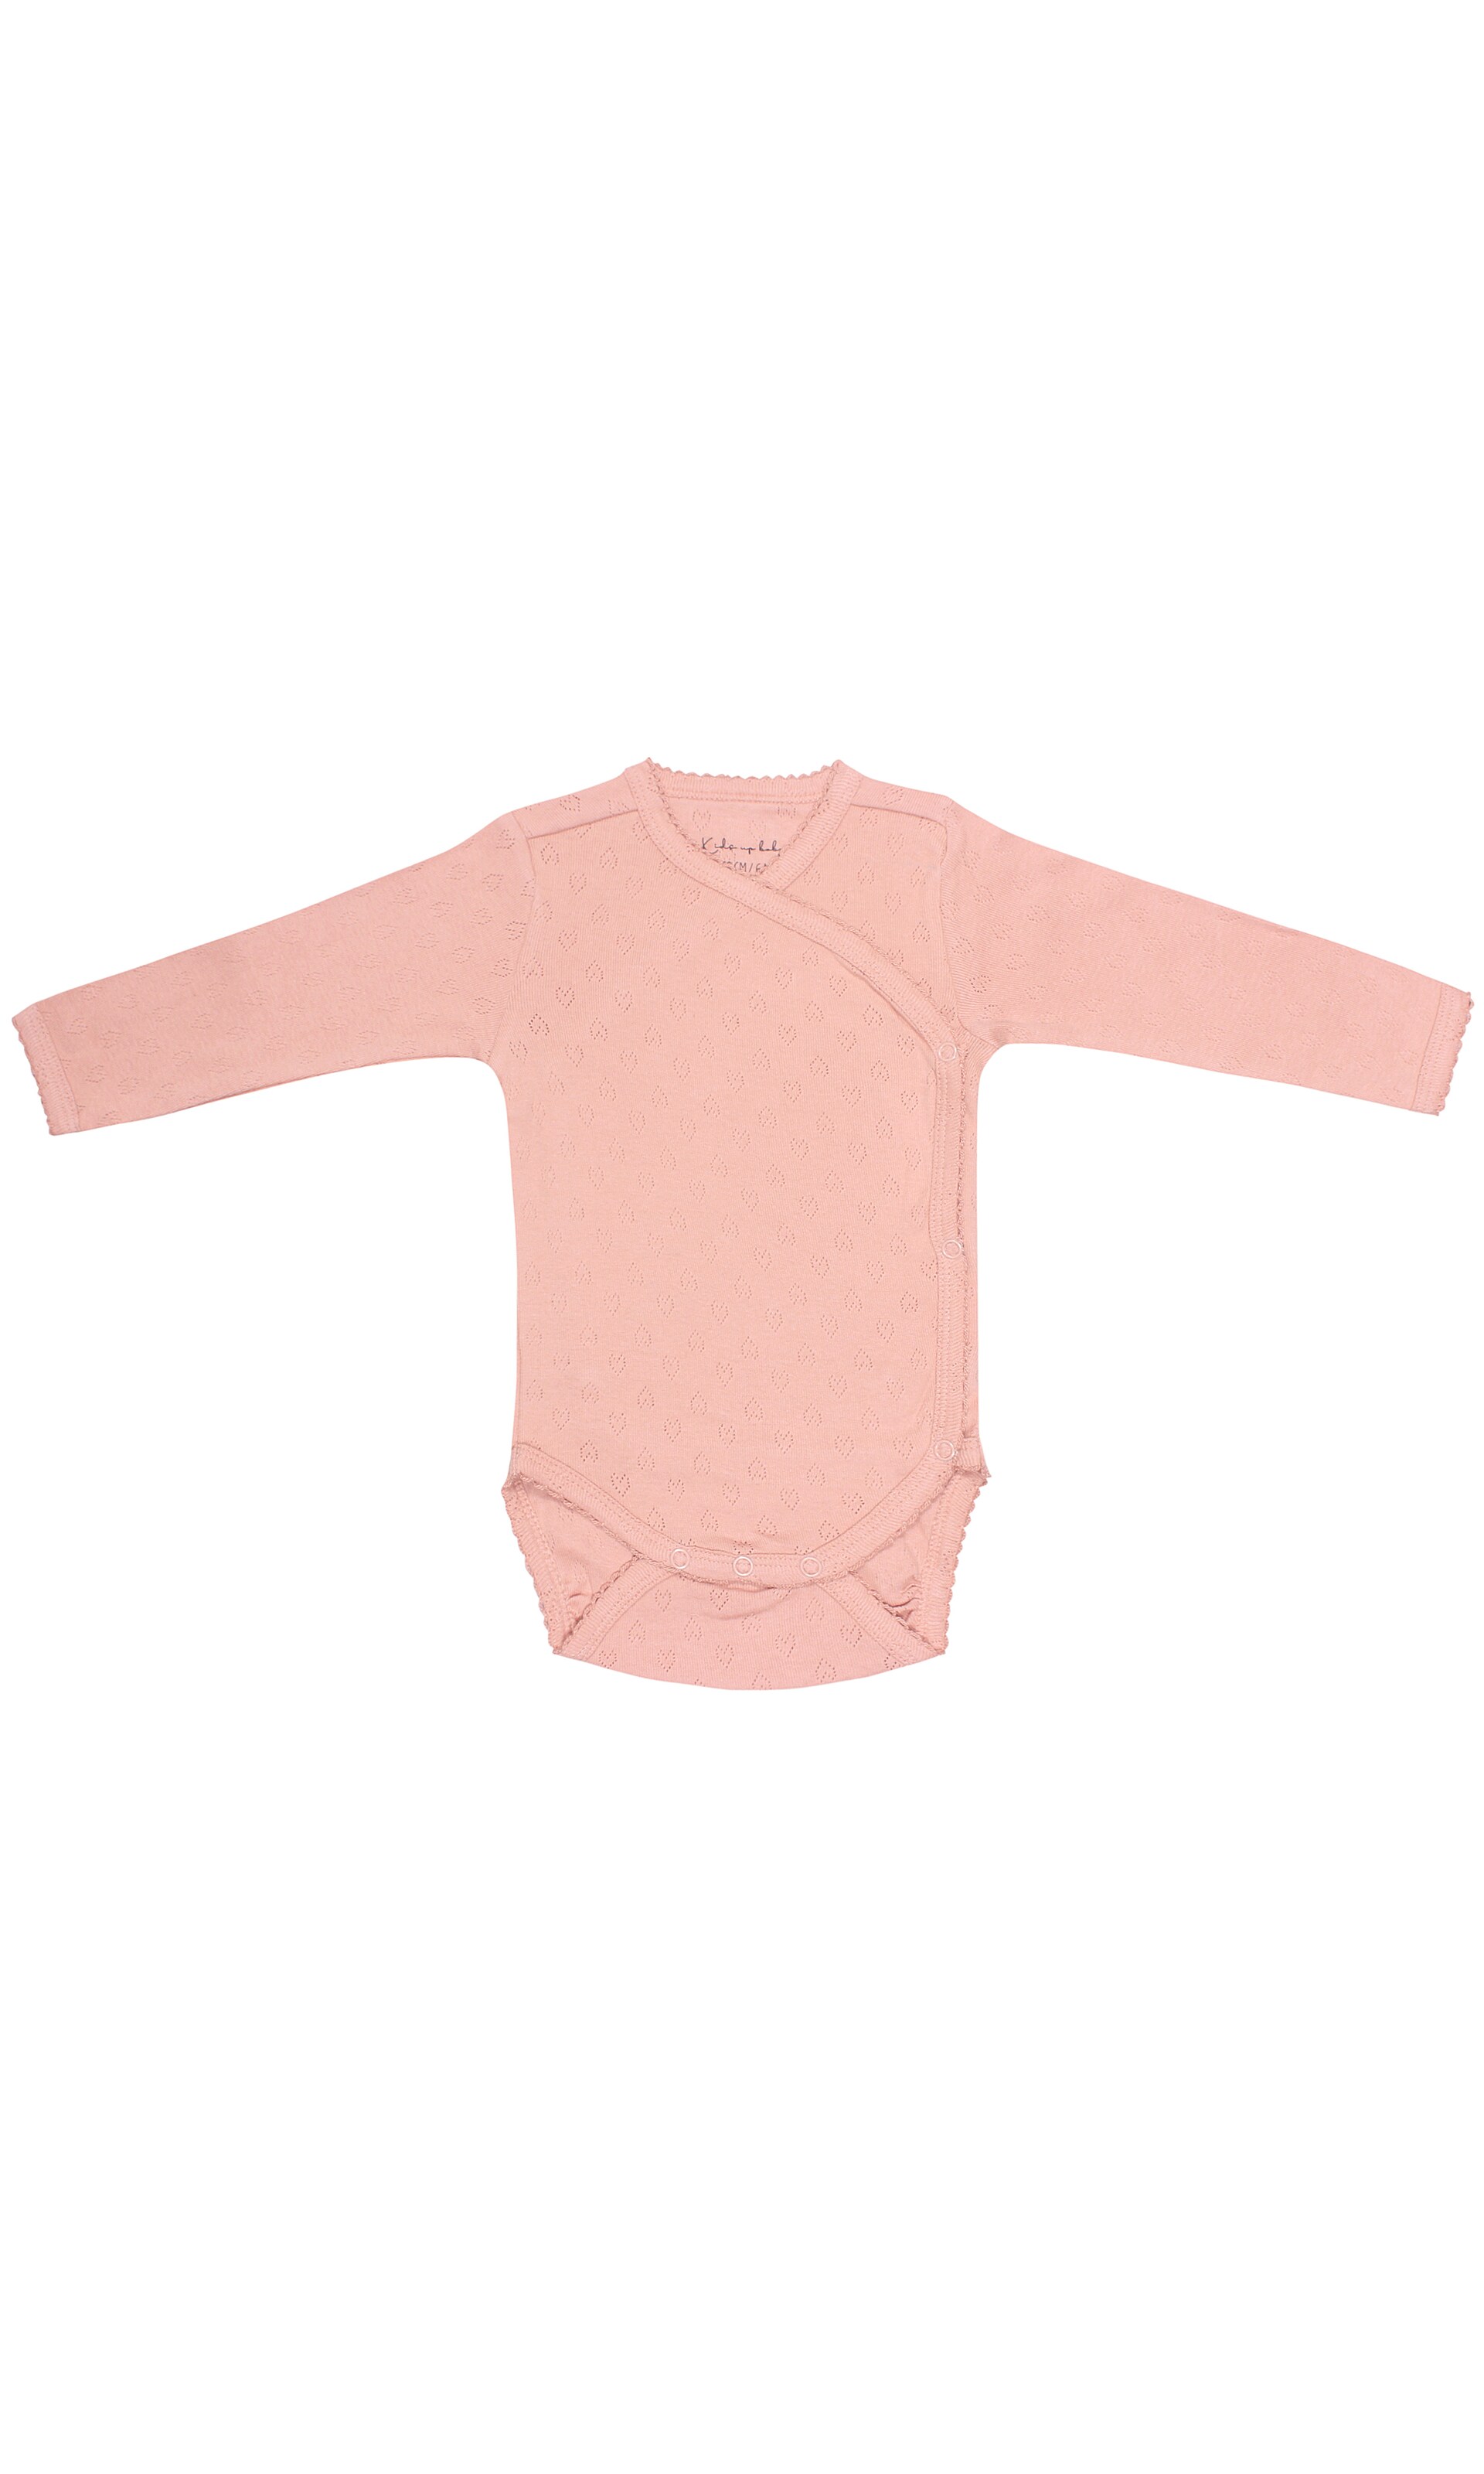 Kids Up Barboteuse / Body 50 Rose